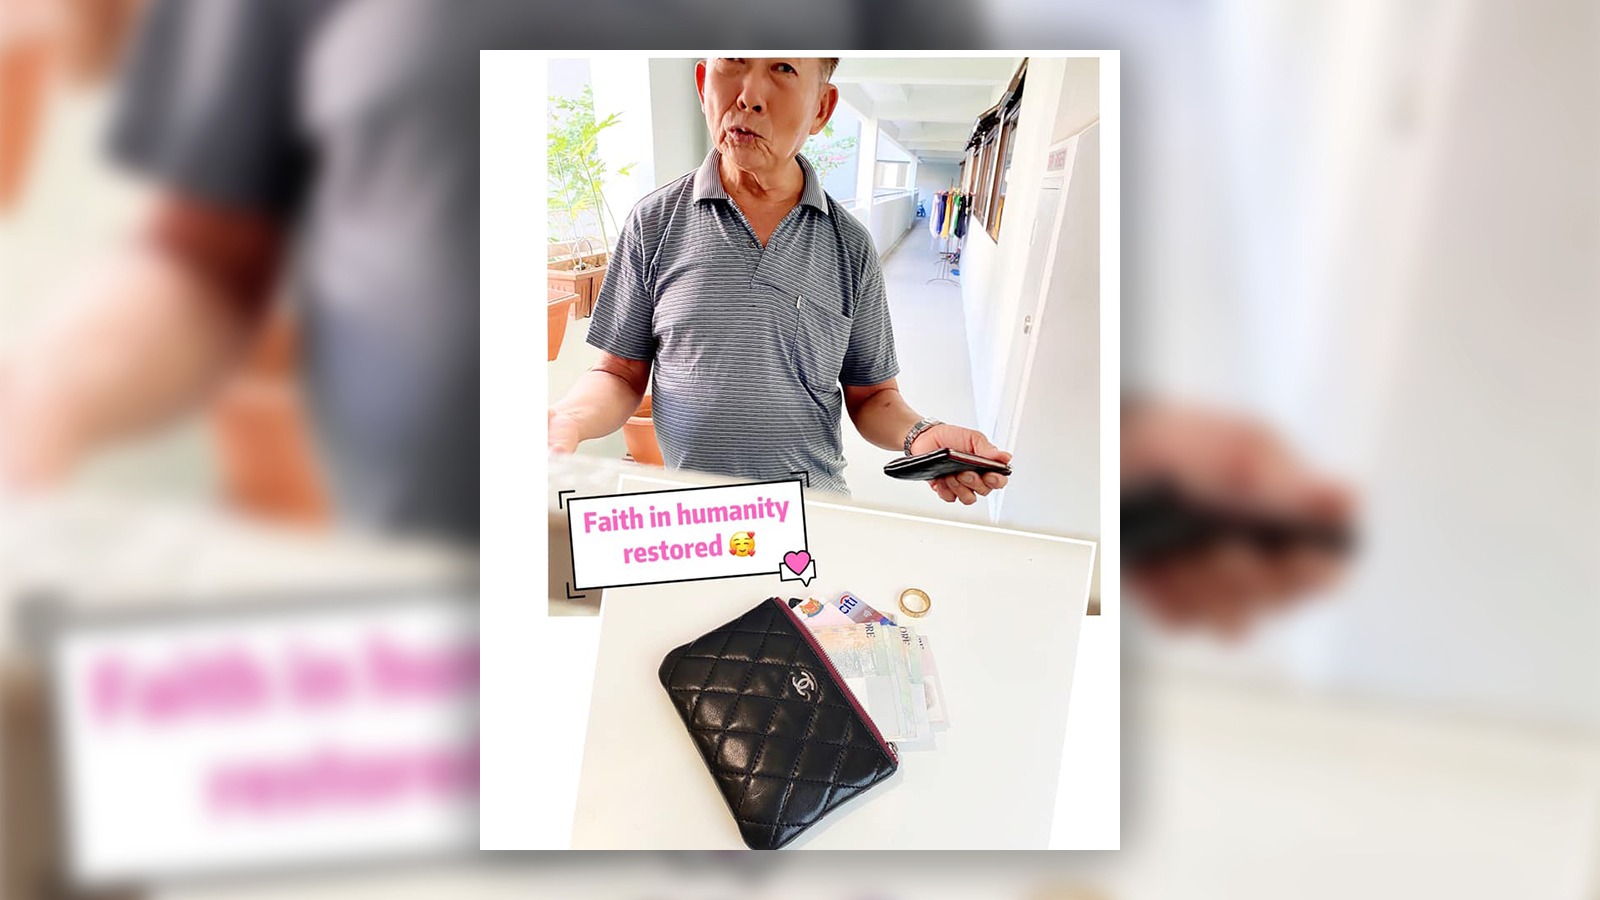 Kindness leads to karma, as cleaner uncle returns lost wallet